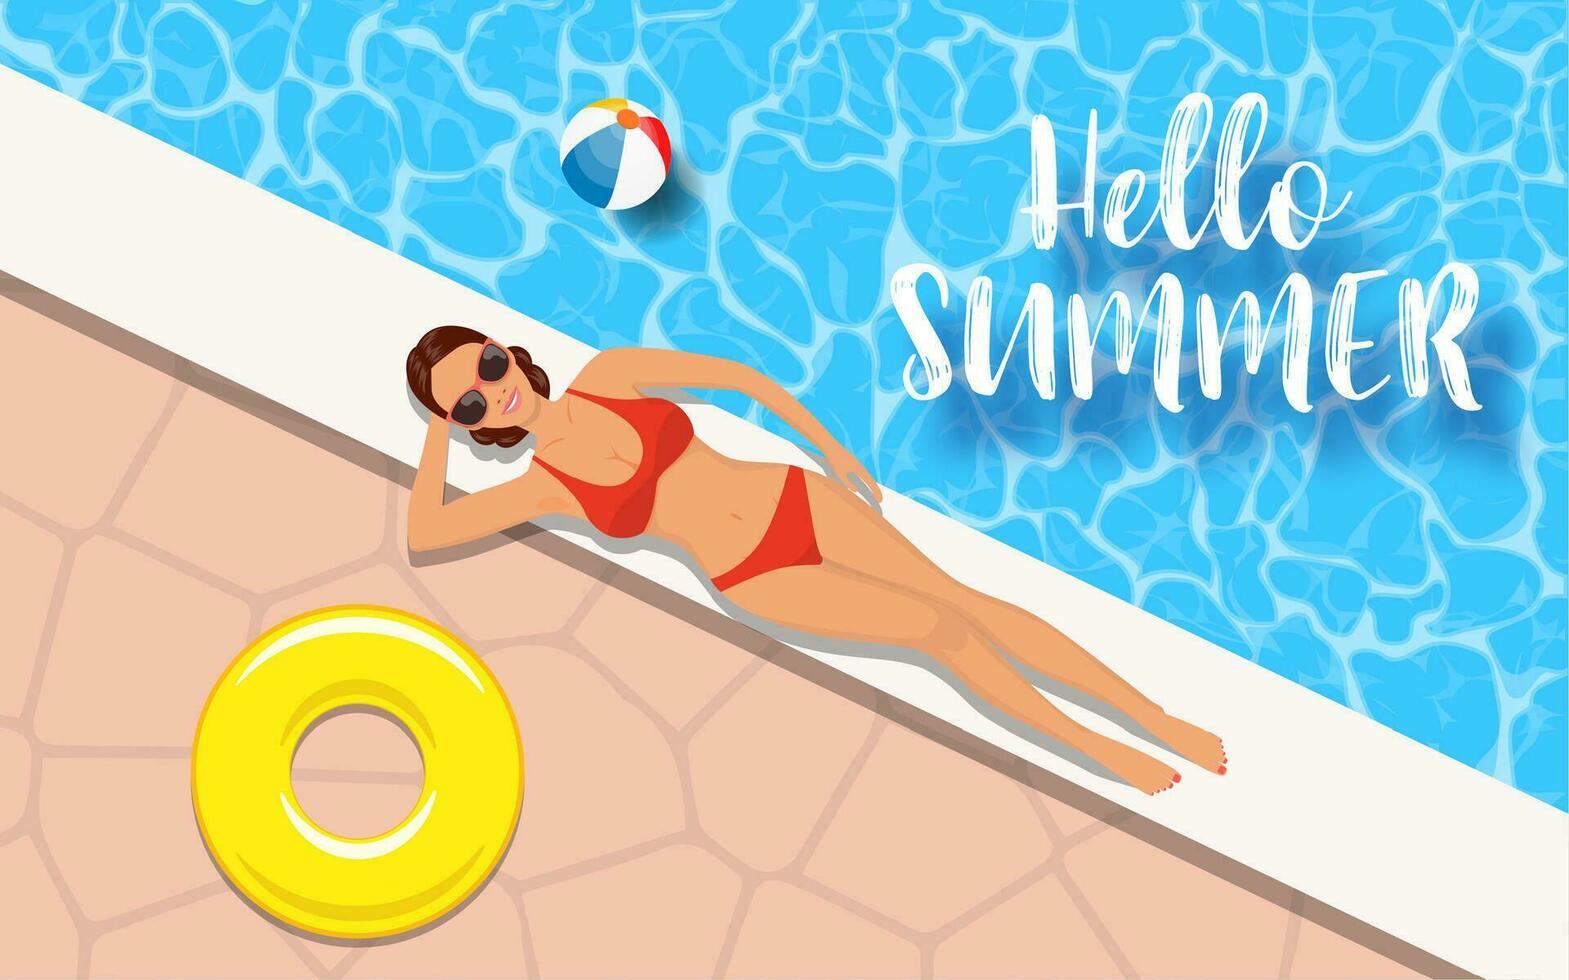 Slim woman in bikini relaxing by the swimming pool. ummer vacation, happiness, travel, smile joy, top view. Vector illustration in flat style